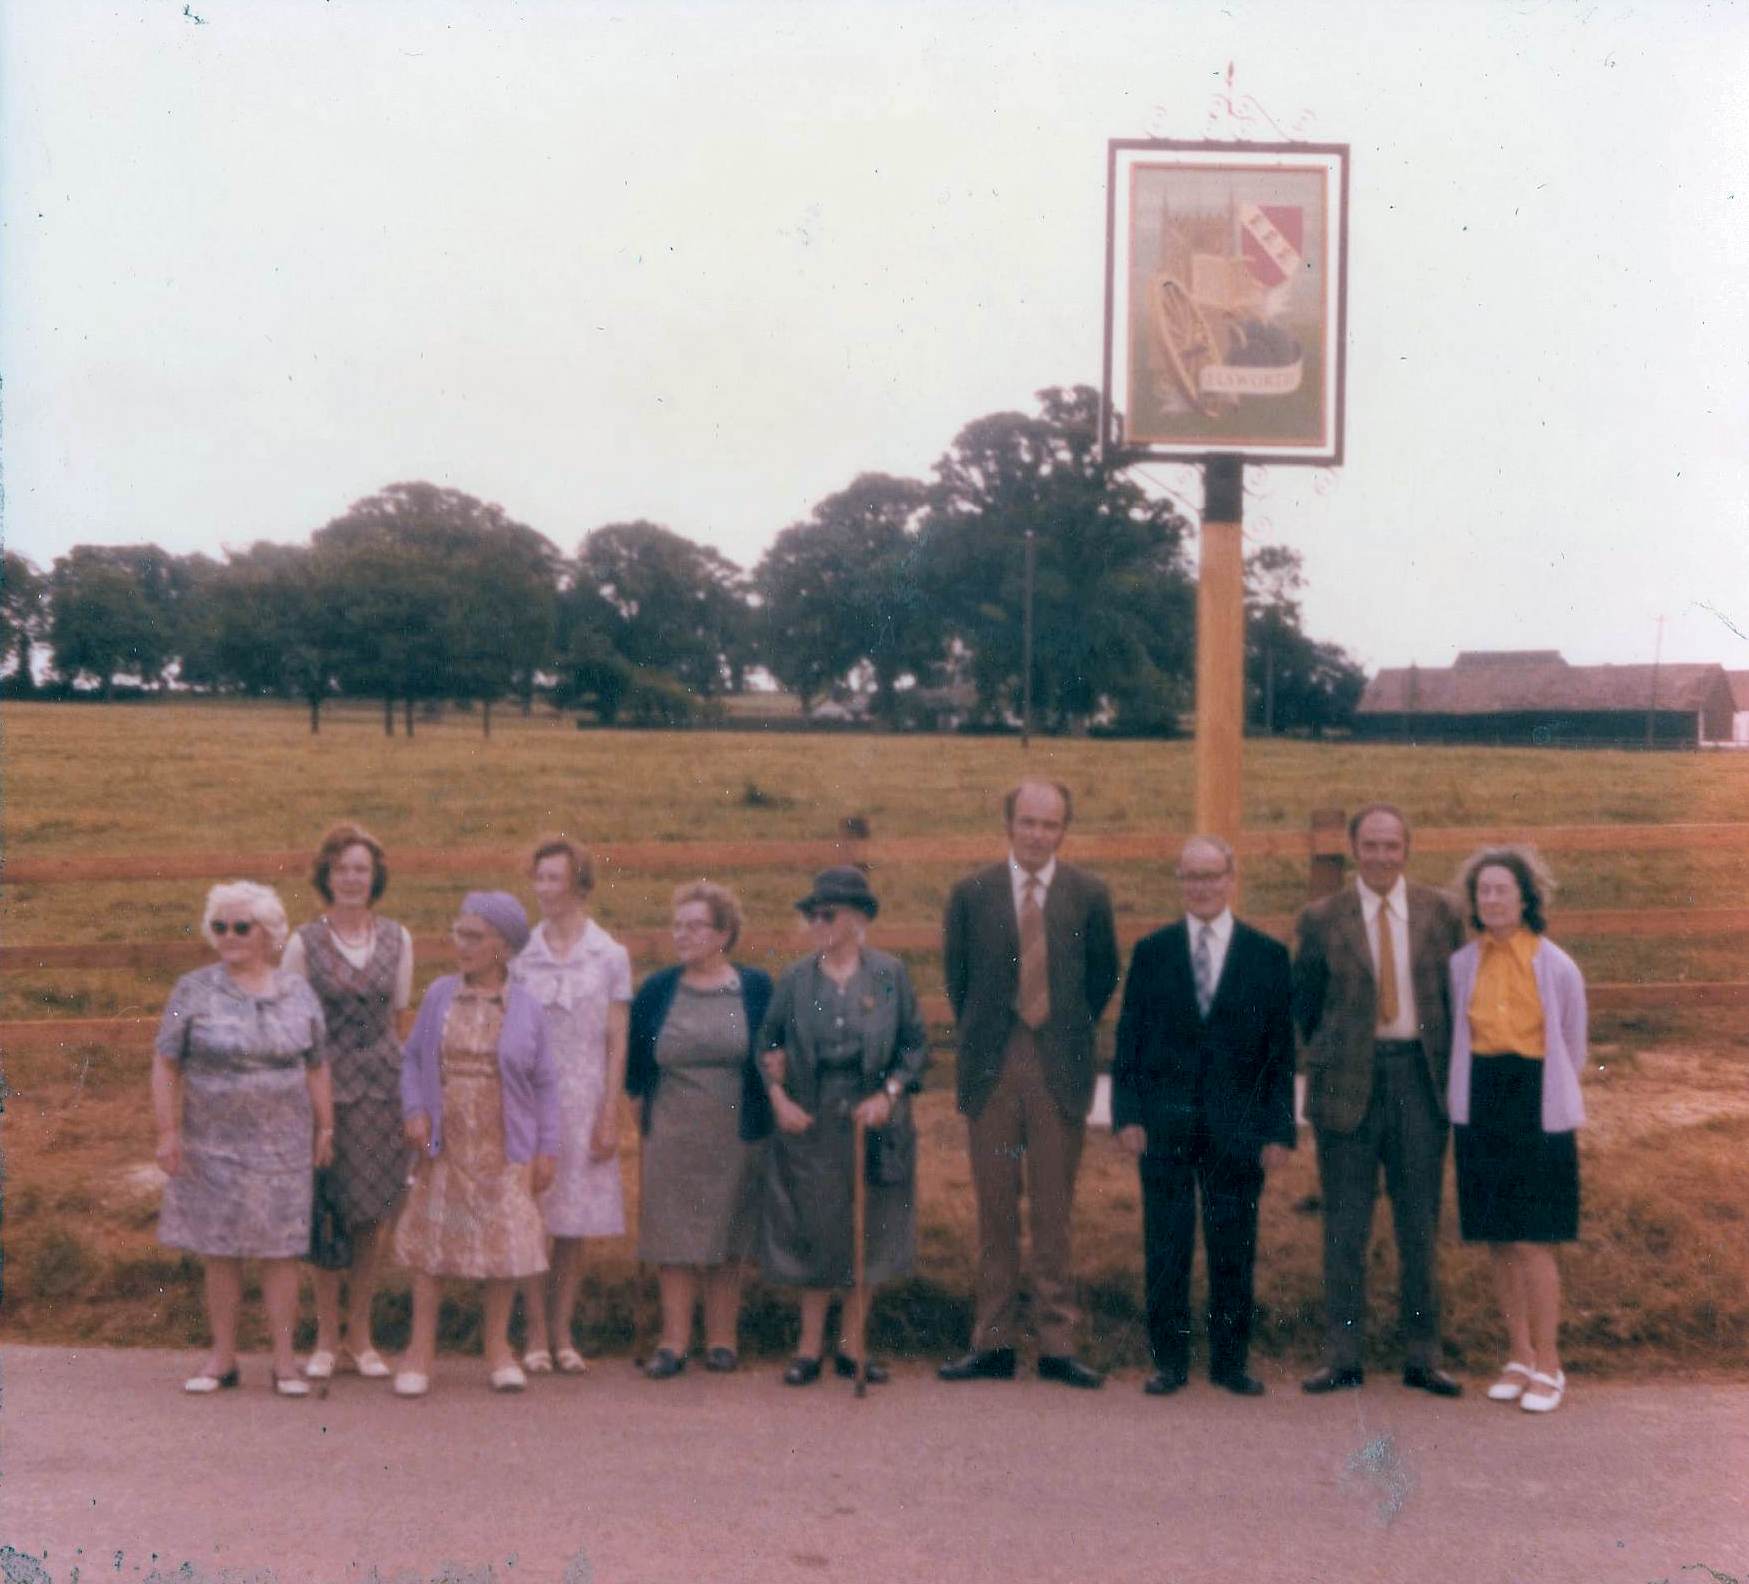 The new village sign in 1975